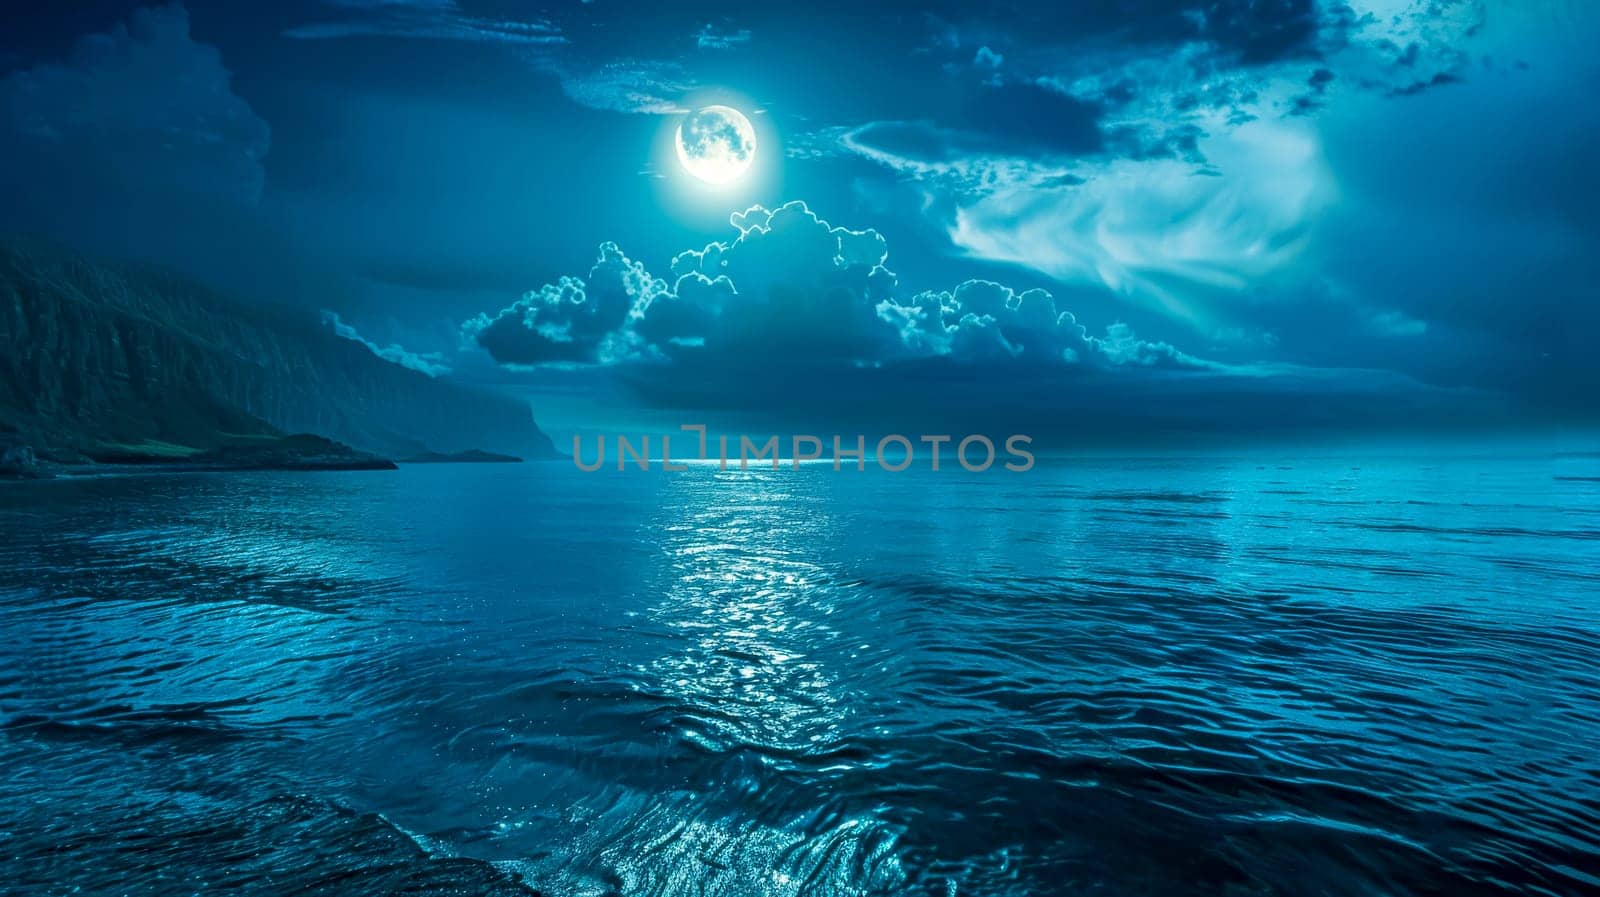 Mystical moonlit seascape at night by Edophoto